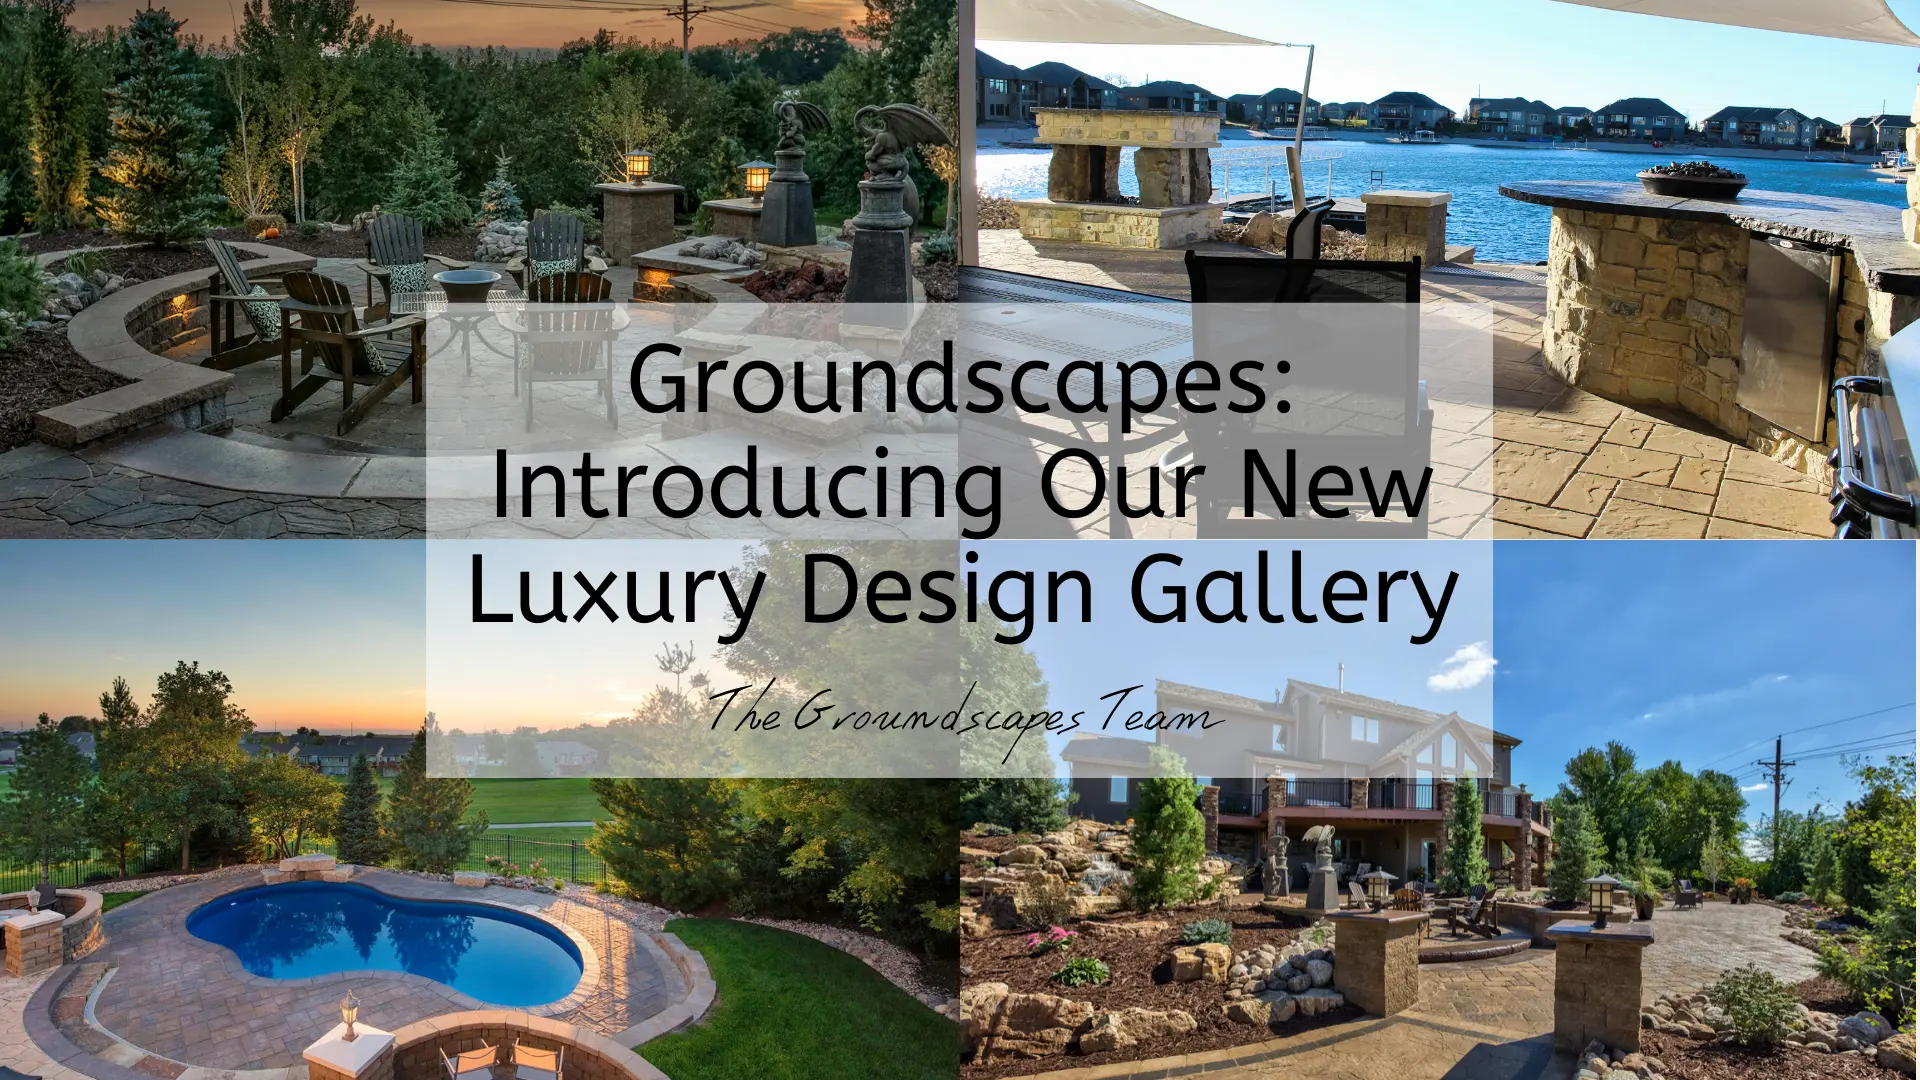 Groundscapes: Introducing Our New Luxury Design Gallery!